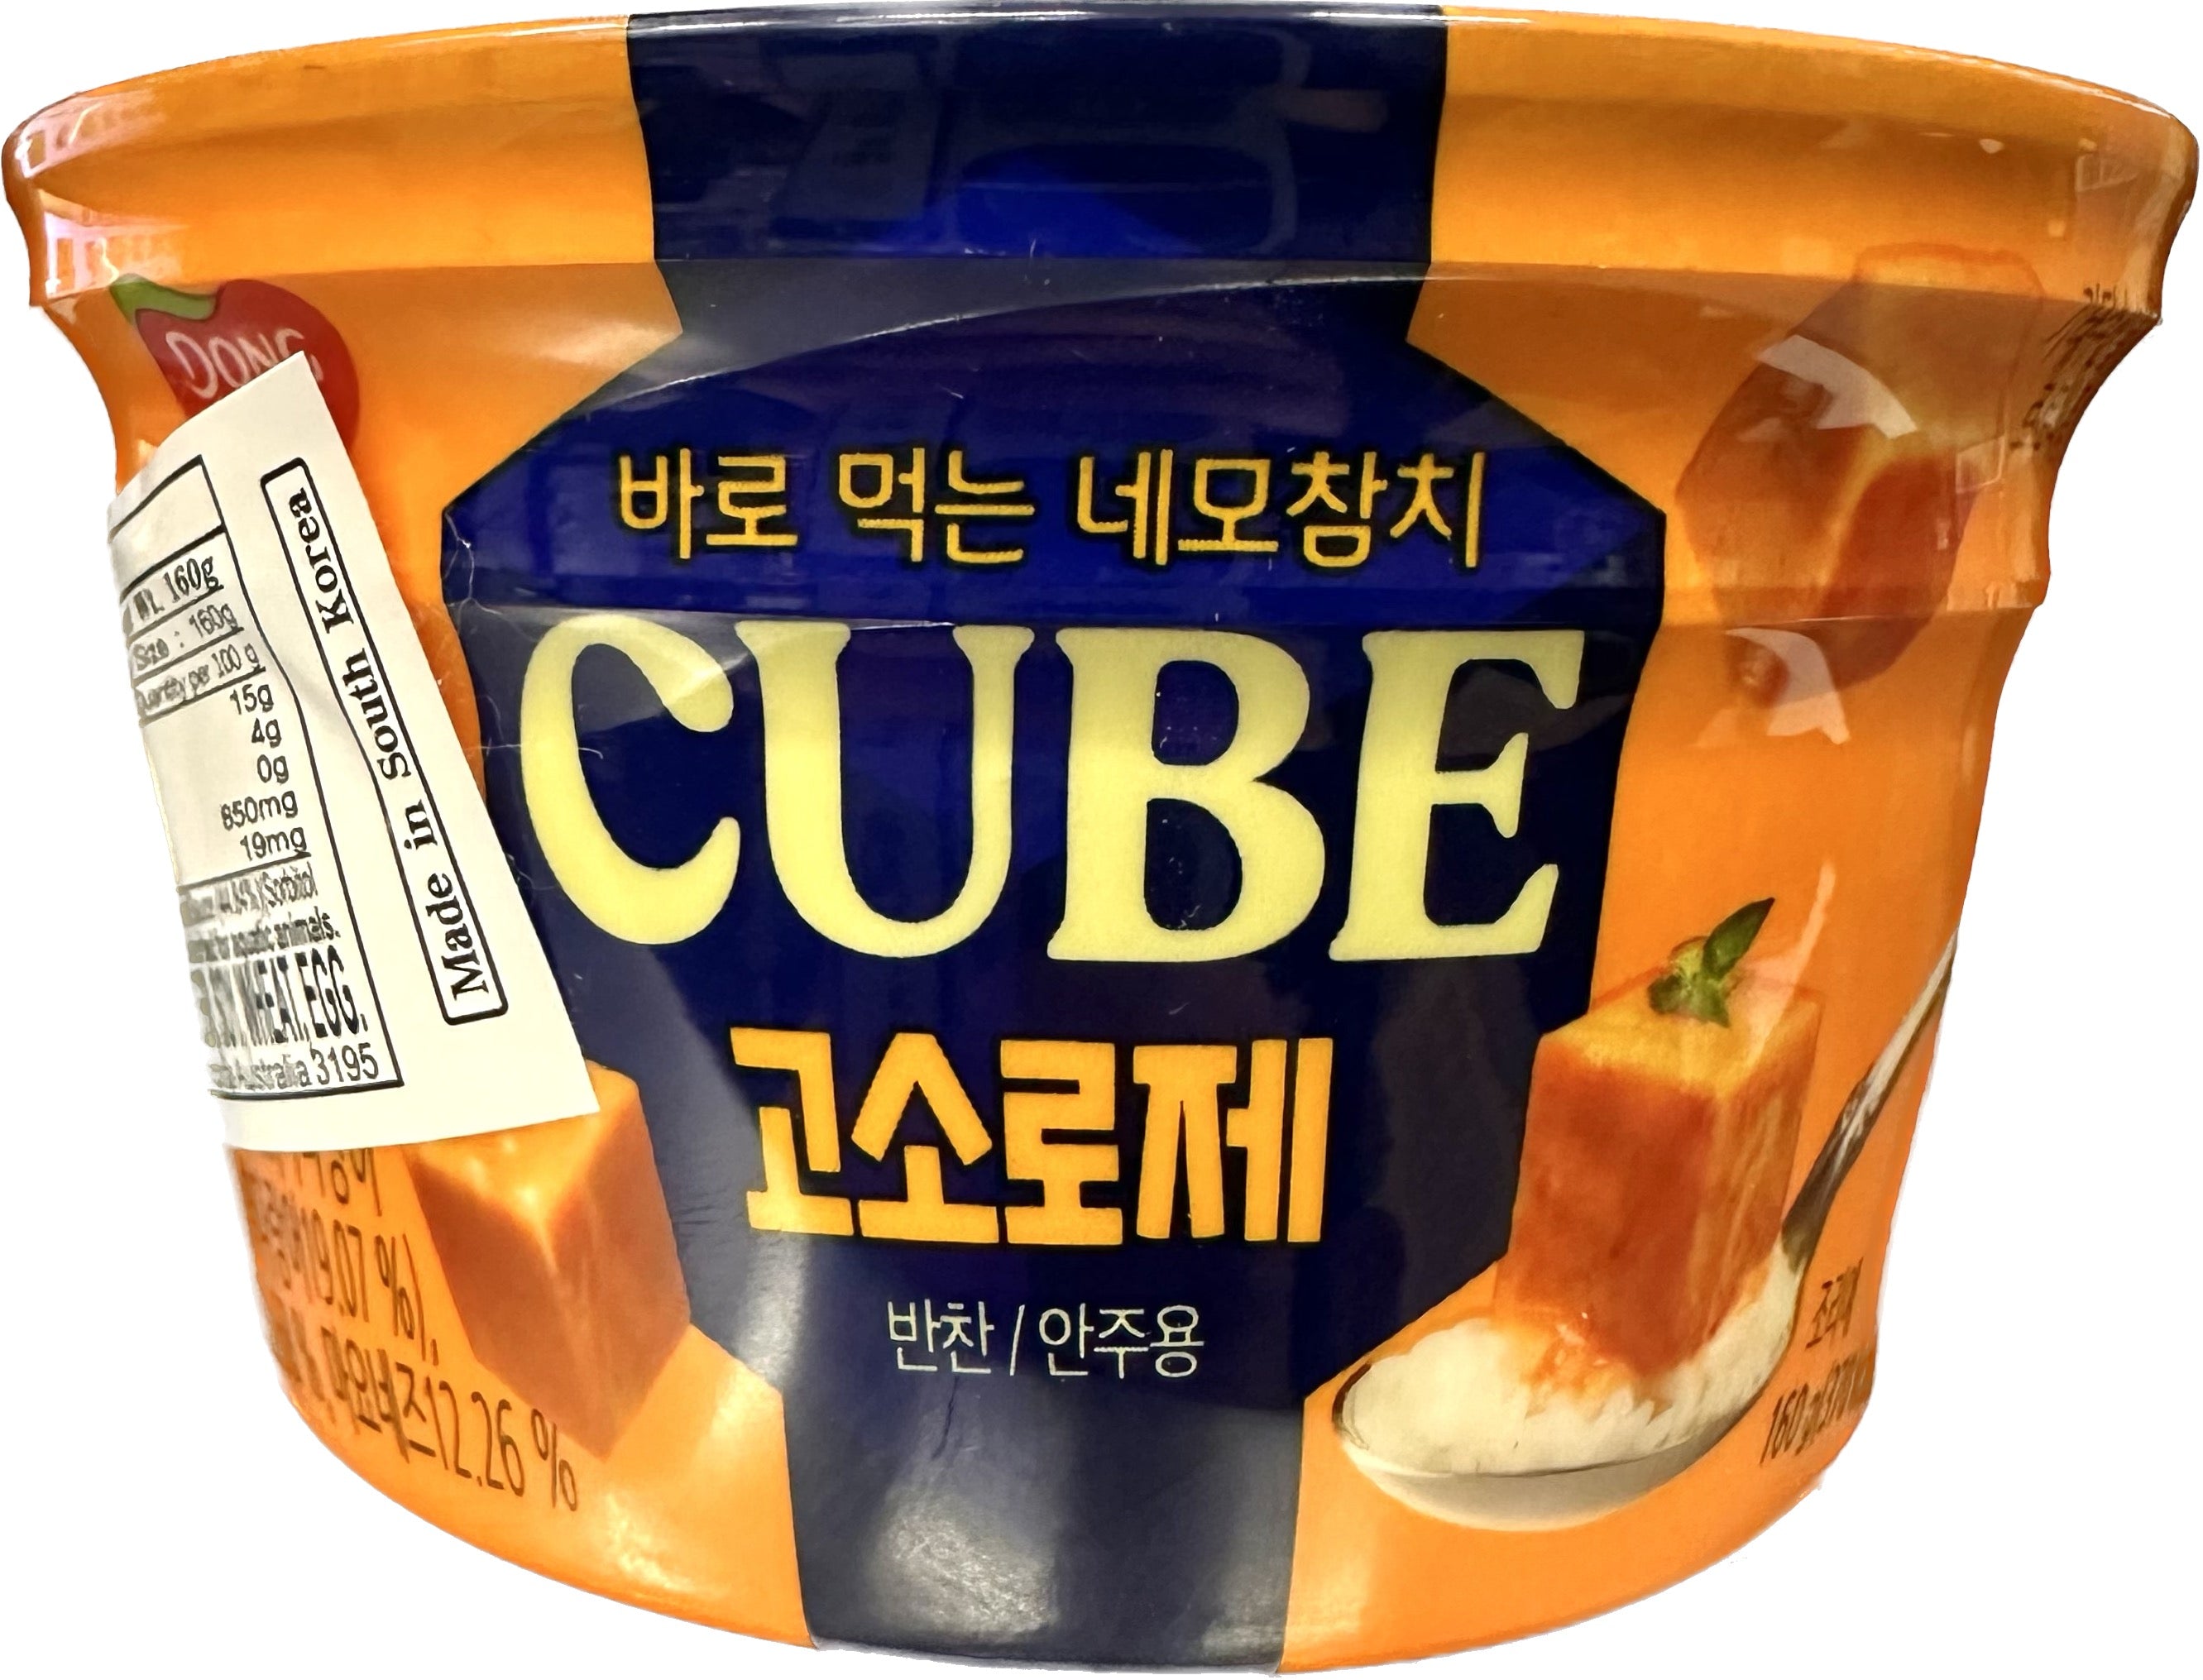 DONGWON CANNED TUNA CUBE SWEET ROSE 160 G